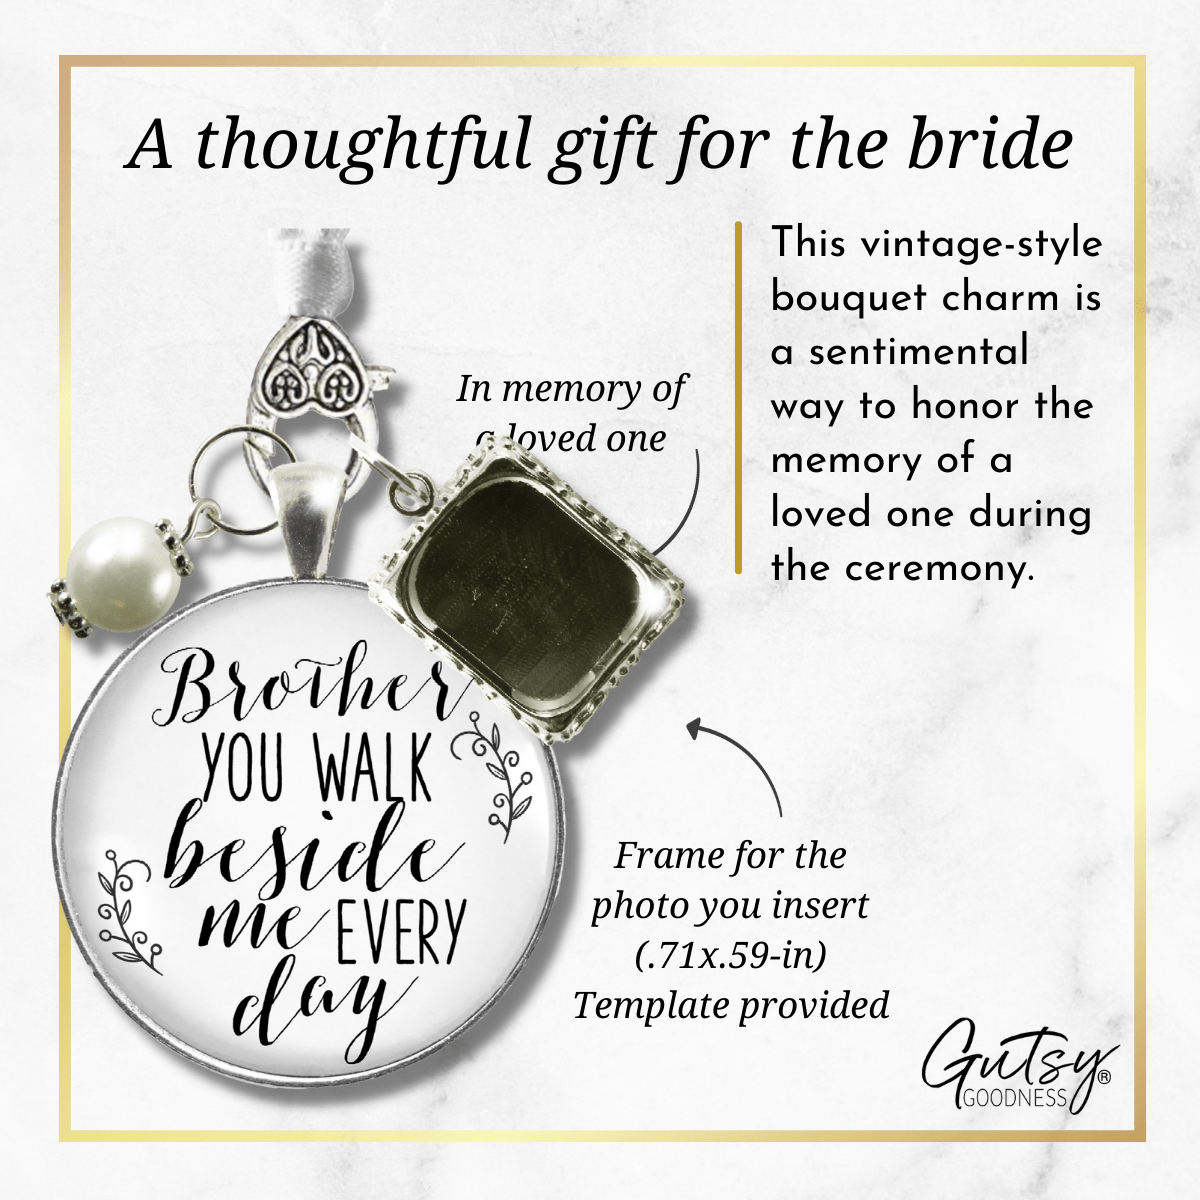 Bridal Bouquet Charm Brother Memorial Picture Frame Wedding Silver Finish Jewelry - Gutsy Goodness Handmade Jewelry Gifts